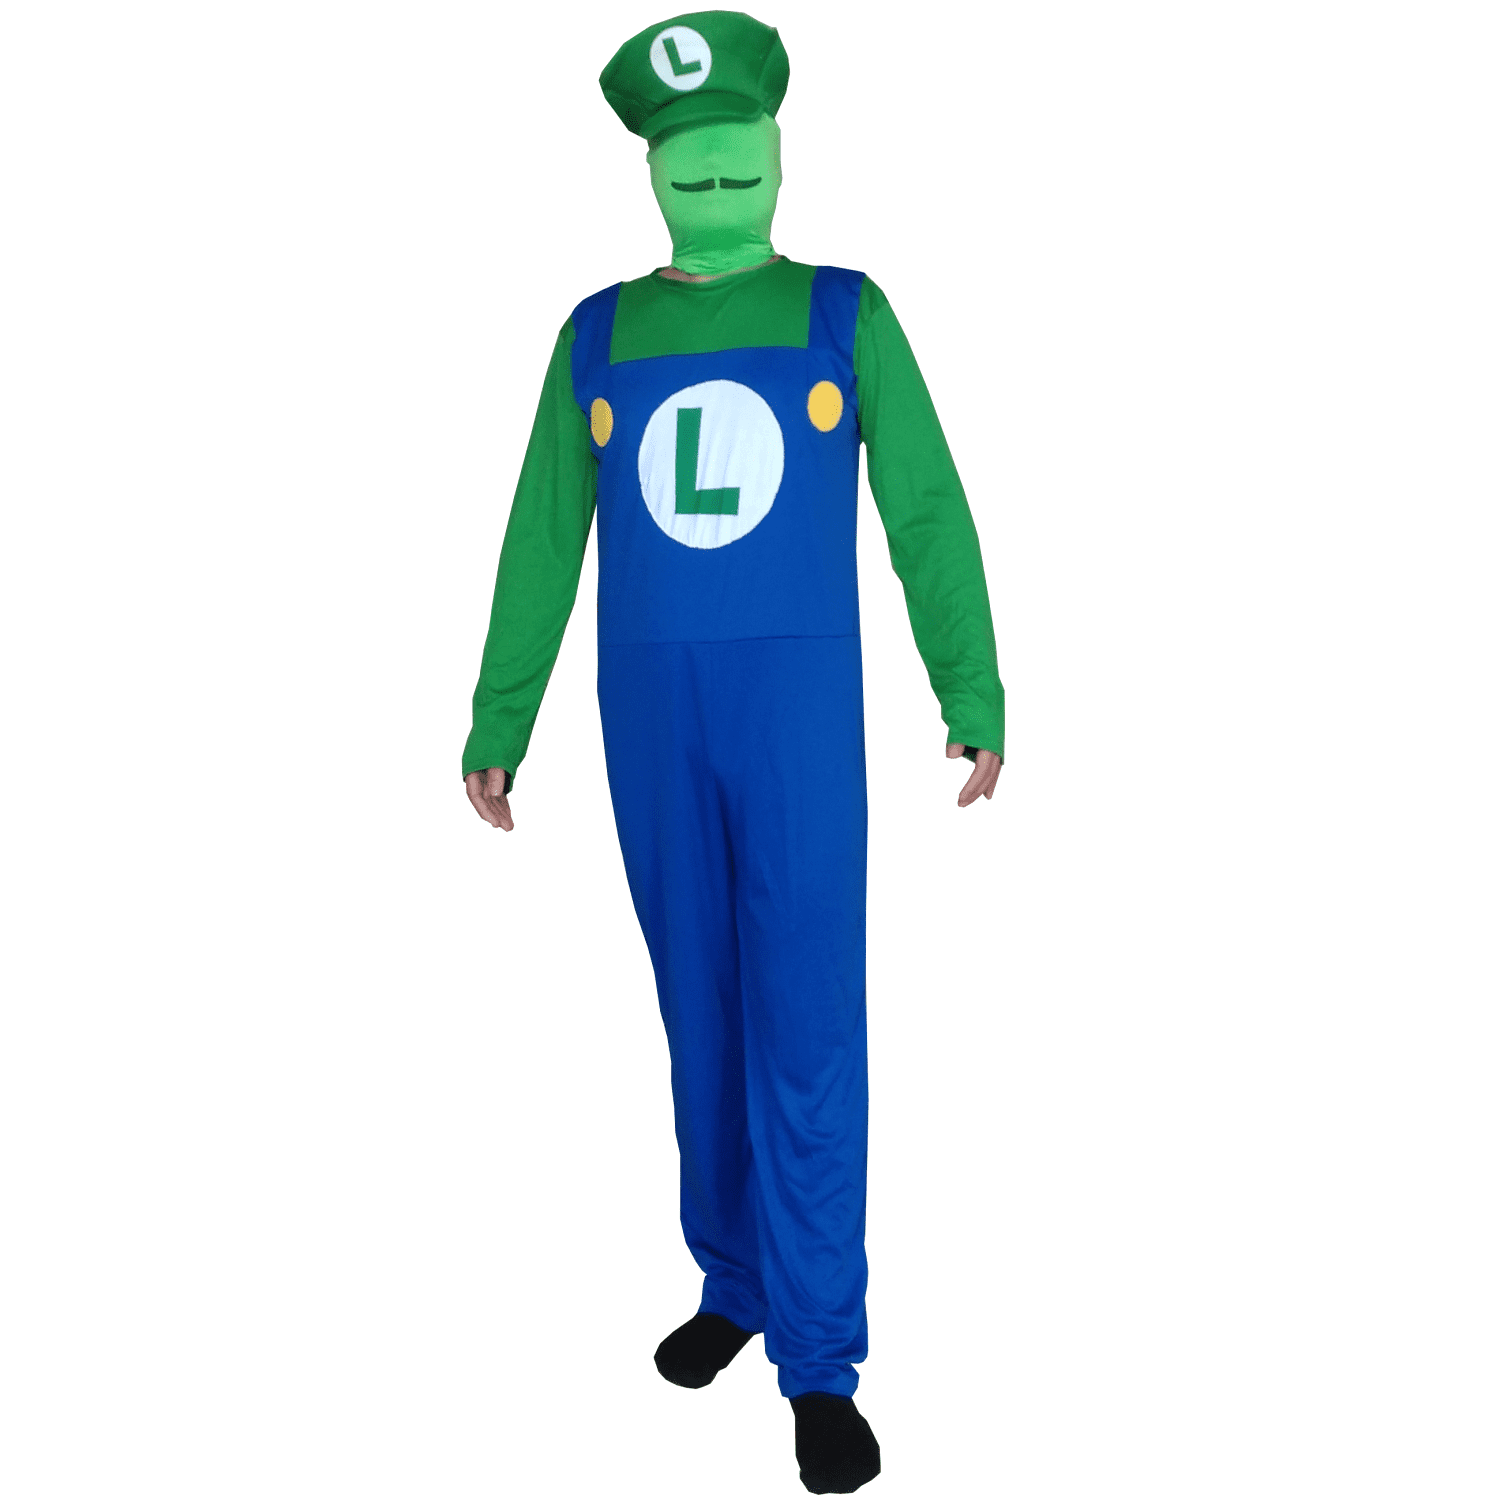 Unisex Kids Super Mario Bros Luigi Party Cosplay Costume Fancy Dress Outfit Sets 